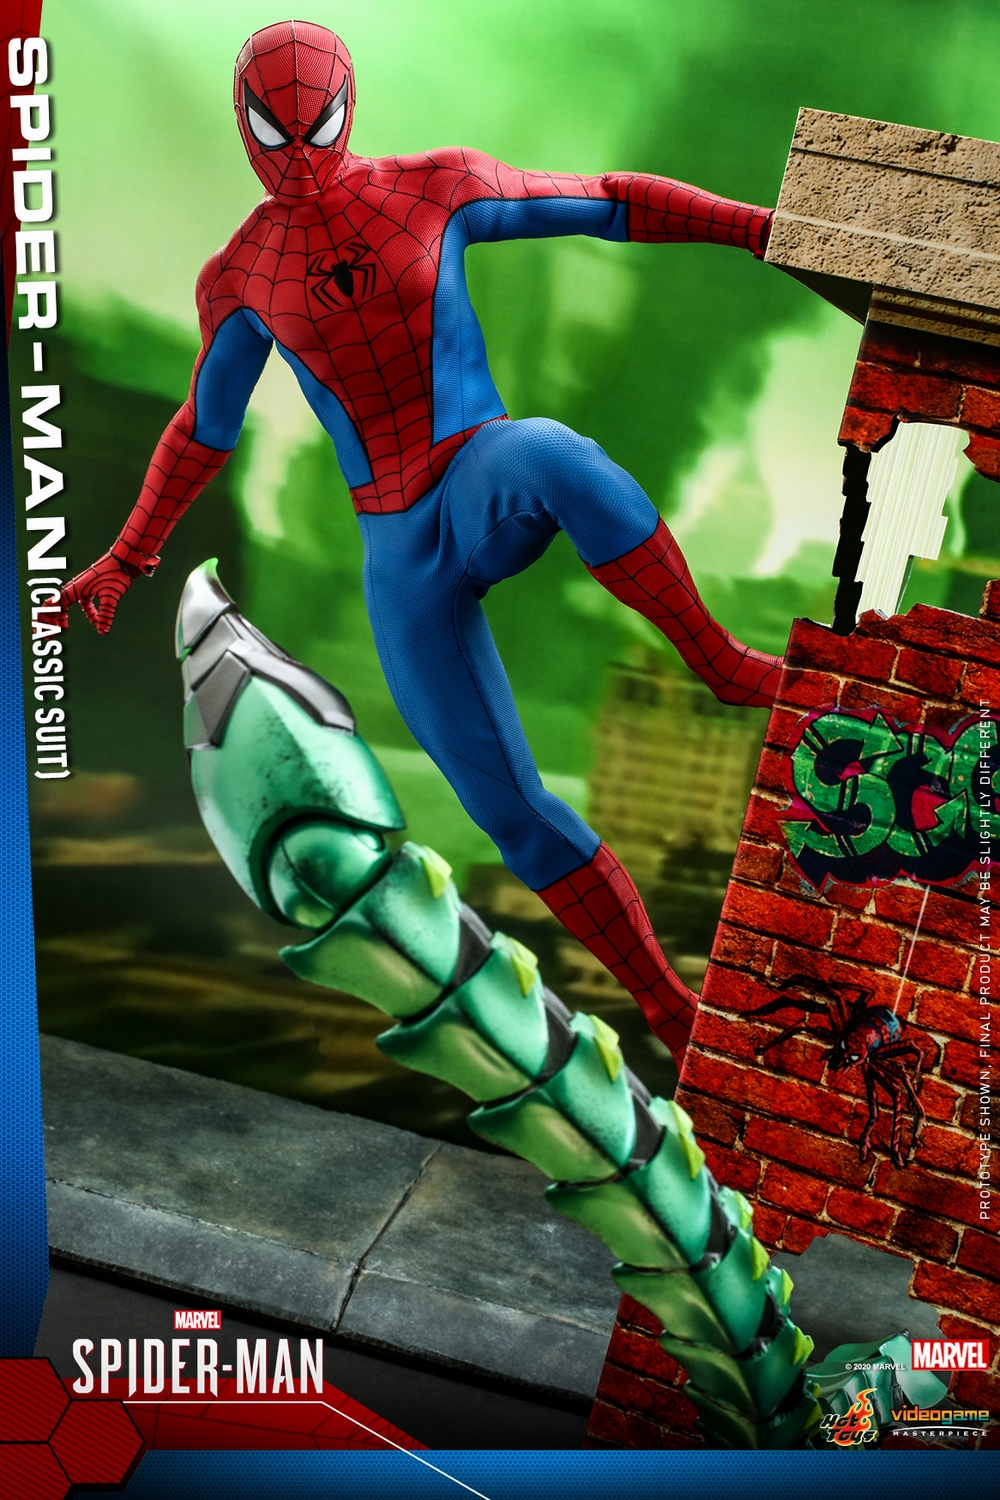 Hot Toys - MSM - Spider-Man (Classic Suit) collectible figure_PR01.jpg